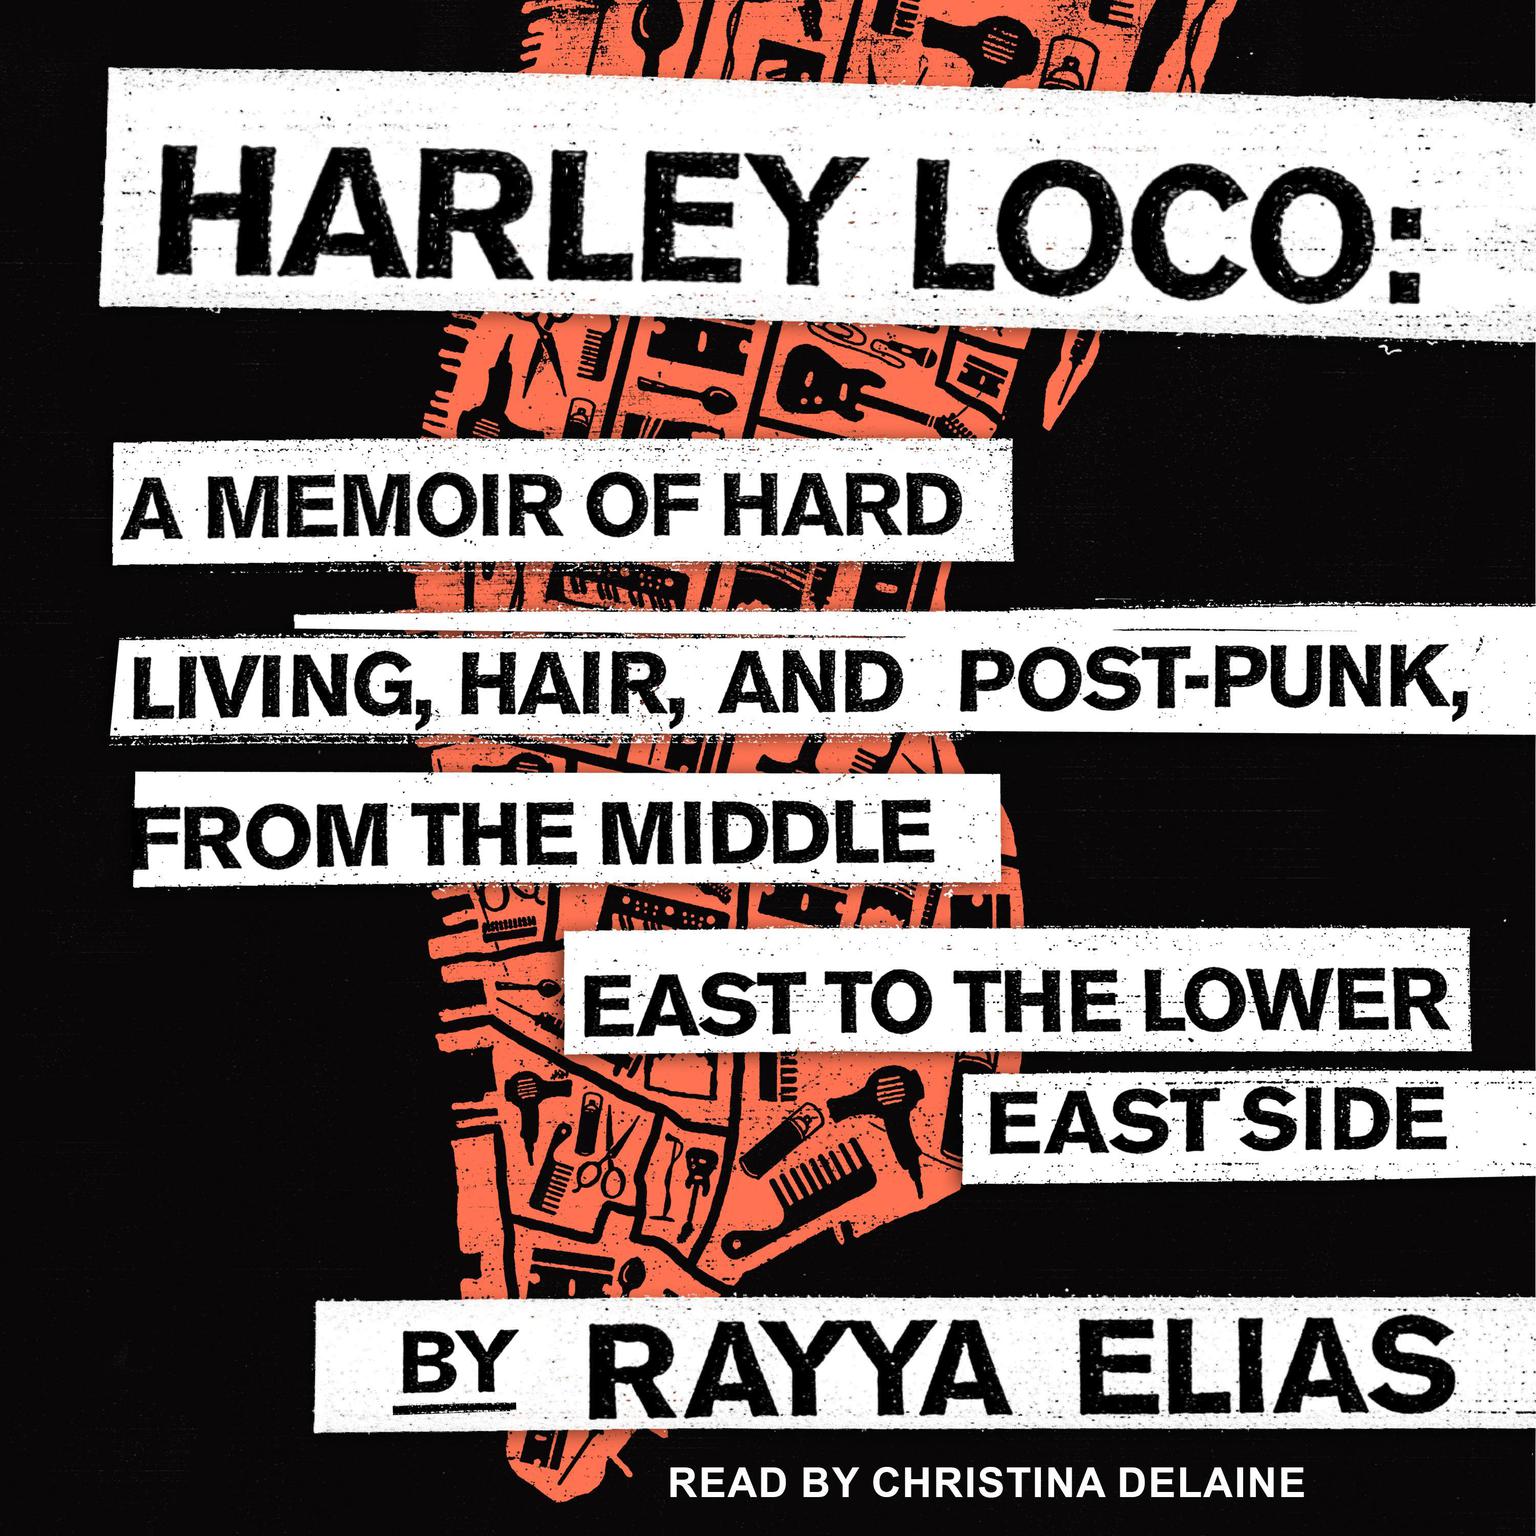 Harley Loco: A Memoir of Hard Living, Hair, and Post-Punk from the Middle East to the Lower East Side Audiobook, by Rayya Elias